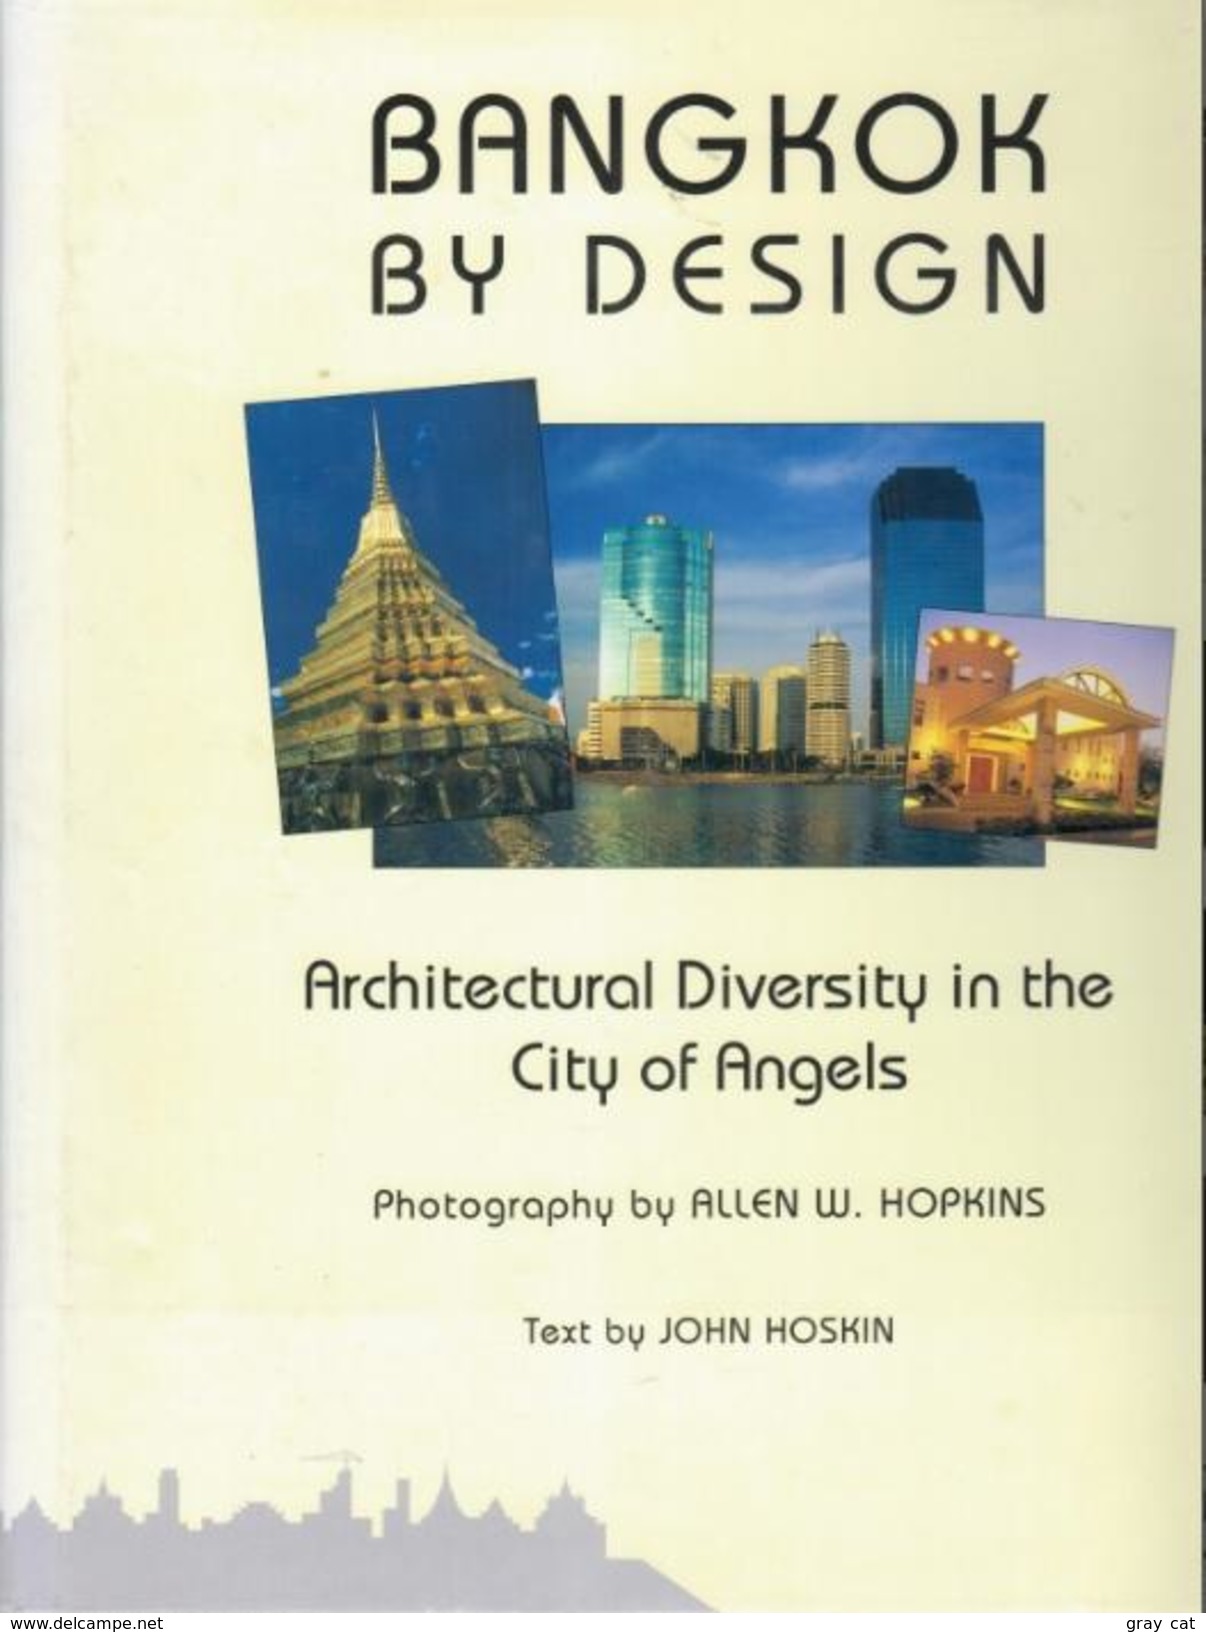 Bangkok By Design: Architectural Diversity In The City Of Angels By John Hoskin ISBN 9789742020378 - Architettura/ Design